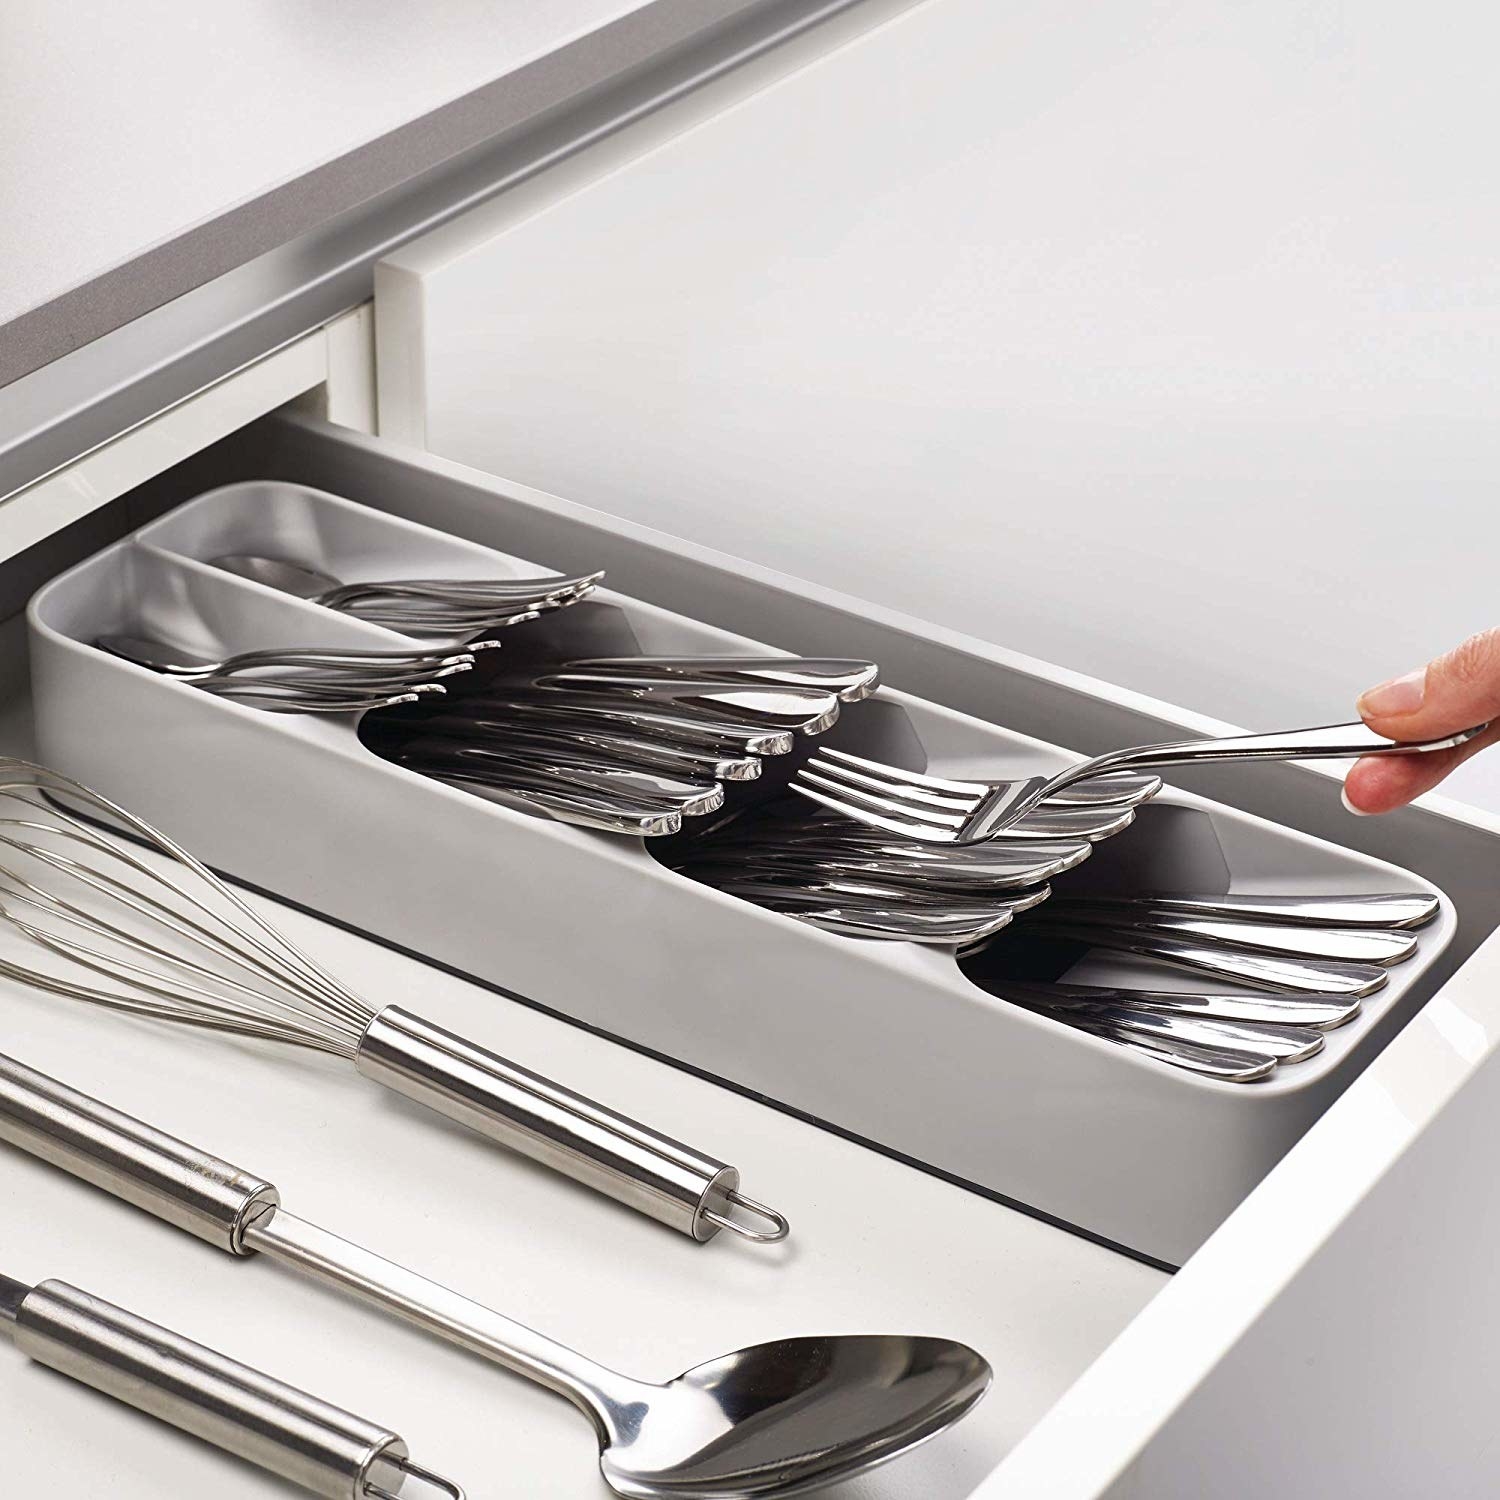 The tray, taking up just a fraction of the drawer, with three full sections filled with silverware and one section divided in half, but also packed with silverware